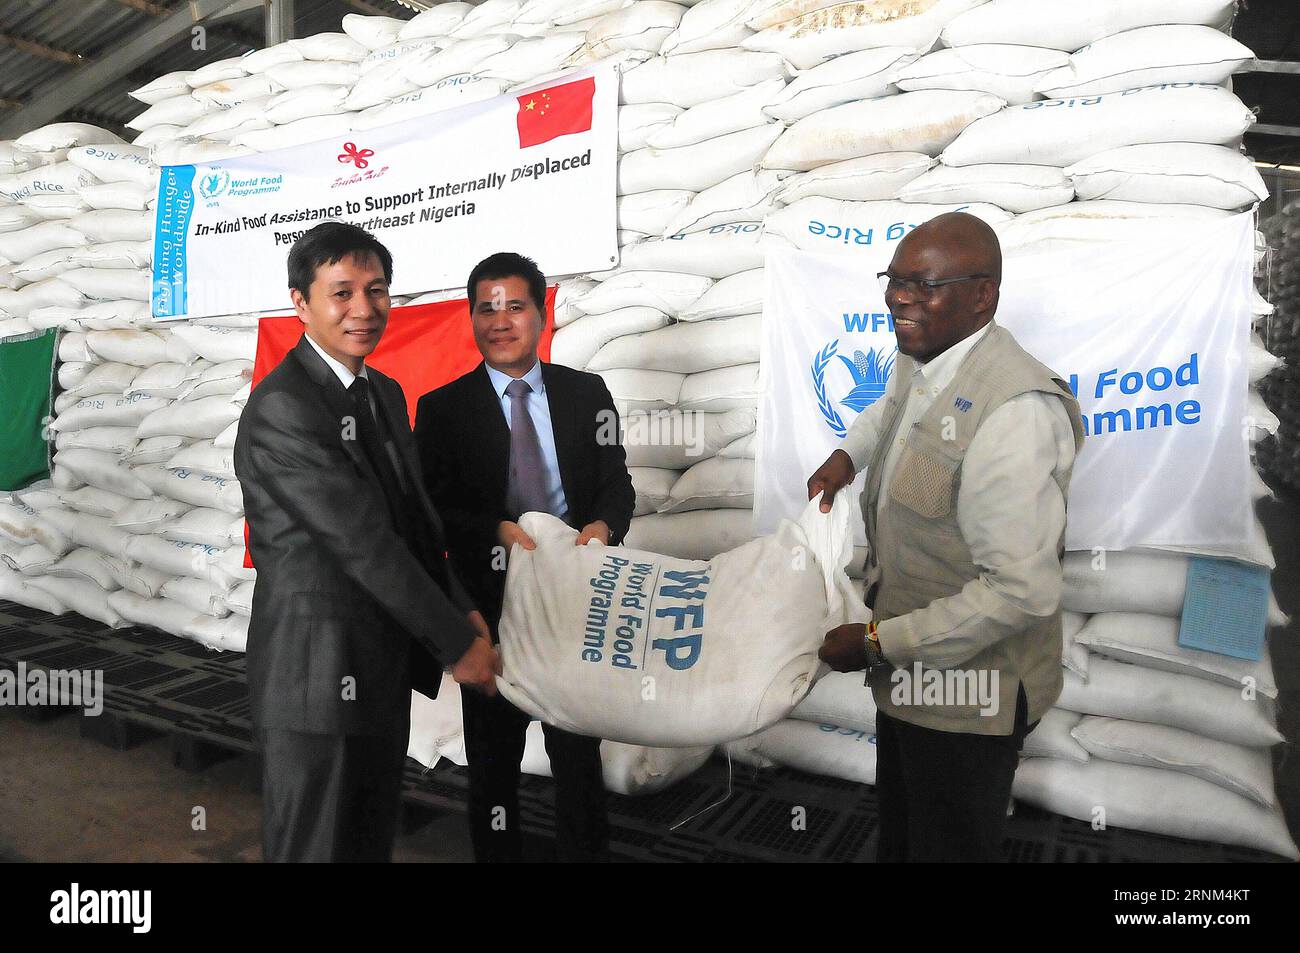 (170509) -- MAIDUGURI, May 9, 2017 -- Chinese ambassador to Nigeria Zhou Pingjian (C) and Ron Sibanda (R), country director and representative of the United Nations World Food Program (WFP) attend a hand-over ceremony at the warehouse of WFP near Maiduguri, Nigeria, on May 8, 2017. China on Monday provided Nigeria with 5 million U.S. dollars in emergency humanitarian aid as part of its support for relief efforts by the United Nations World Food Program (WFP) in northeast Nigeria. ) (zy) NIGERIA-MAIDUGURI-CHINA-HUMANITARIAN AID ZhangxBaoping PUBLICATIONxNOTxINxCHN   Maiduguri May 9 2017 Chinese Stock Photo